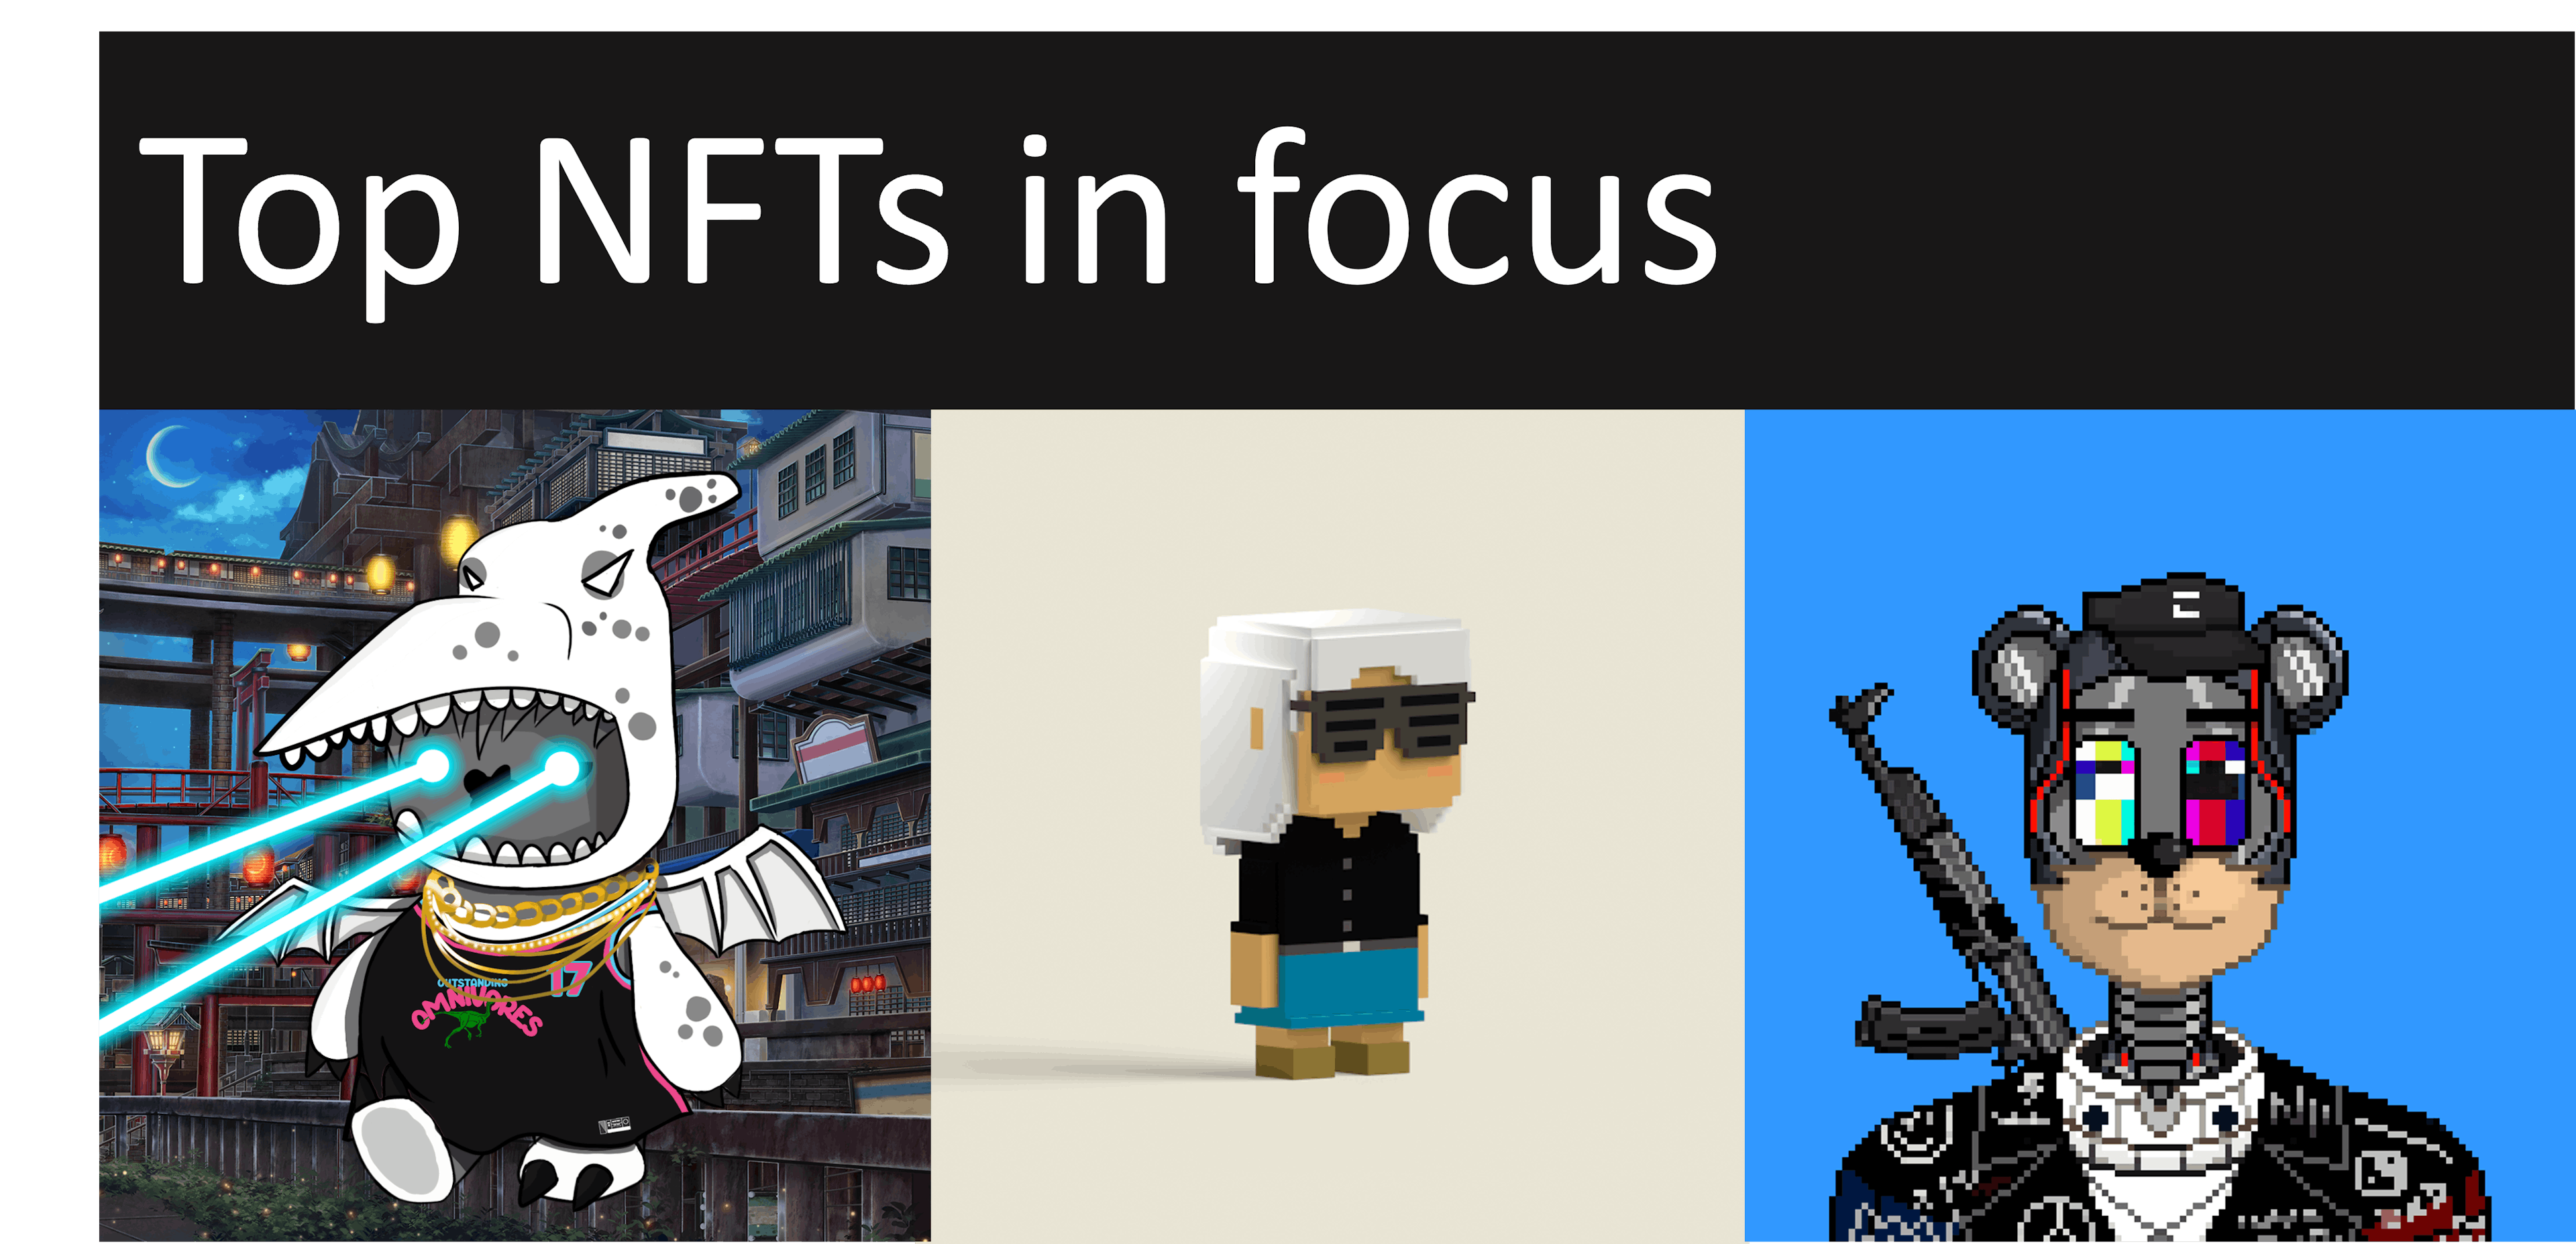 featured image - Most focused top 3 NFT projects - Why - “Utility as an in-game avatar to DeFi”